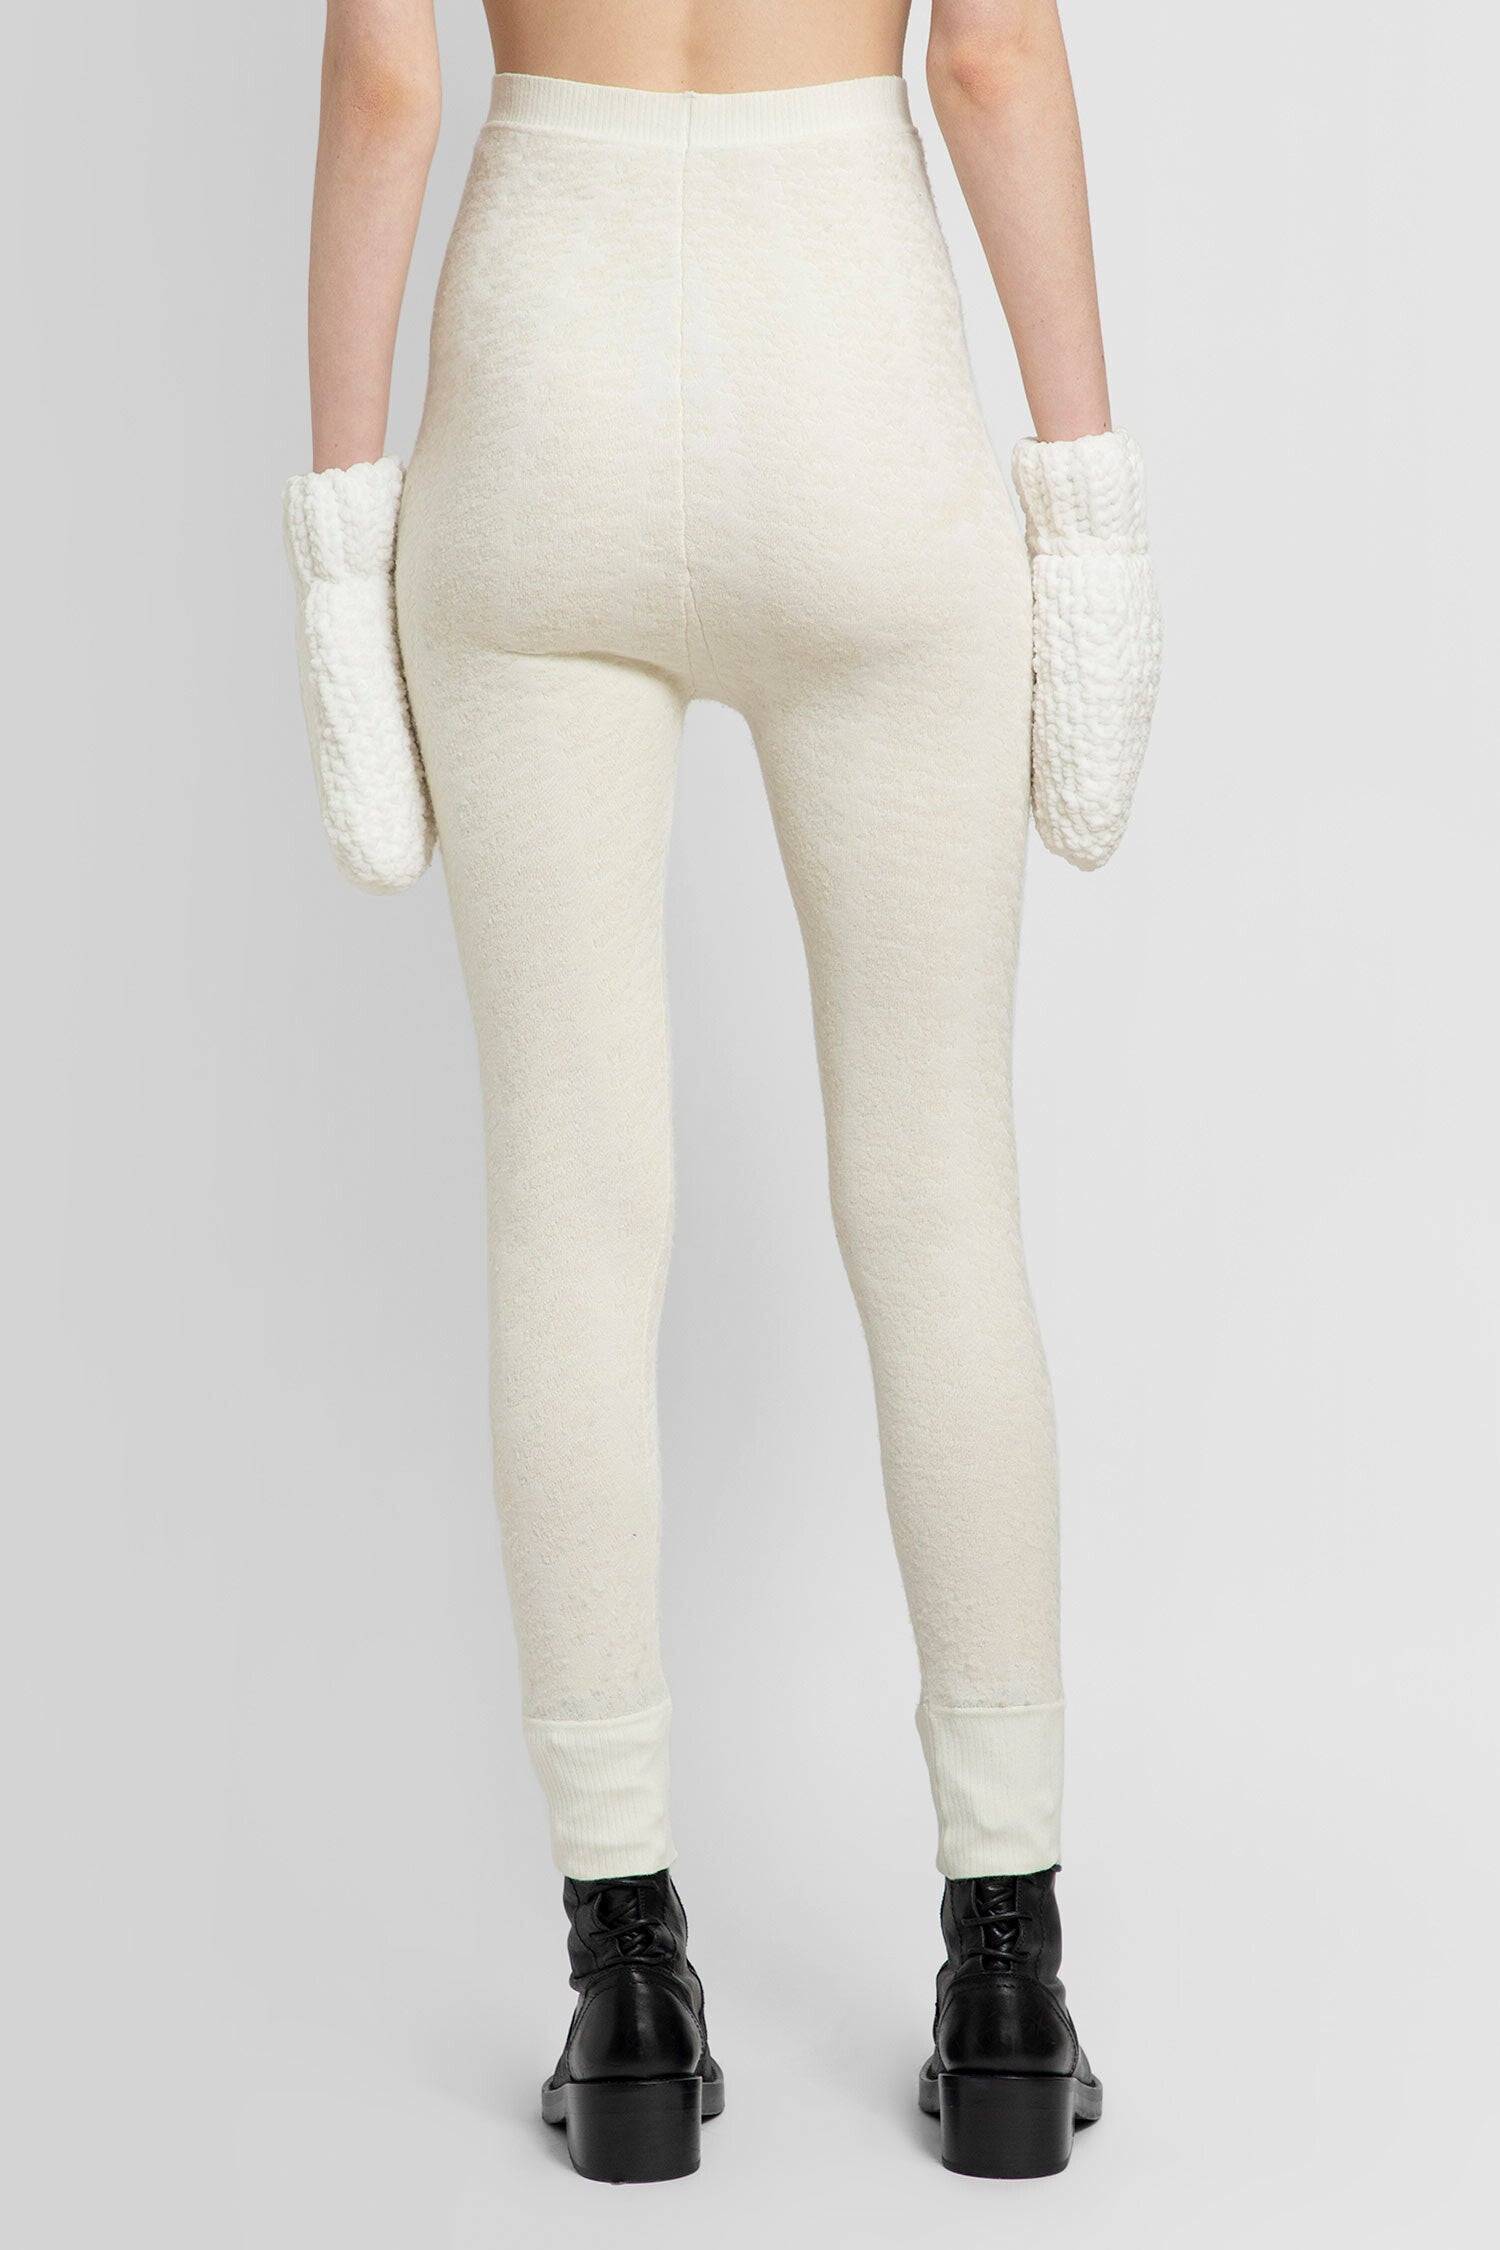 CHRISTINA SEEWALD WOMAN OFF-WHITE TROUSERS